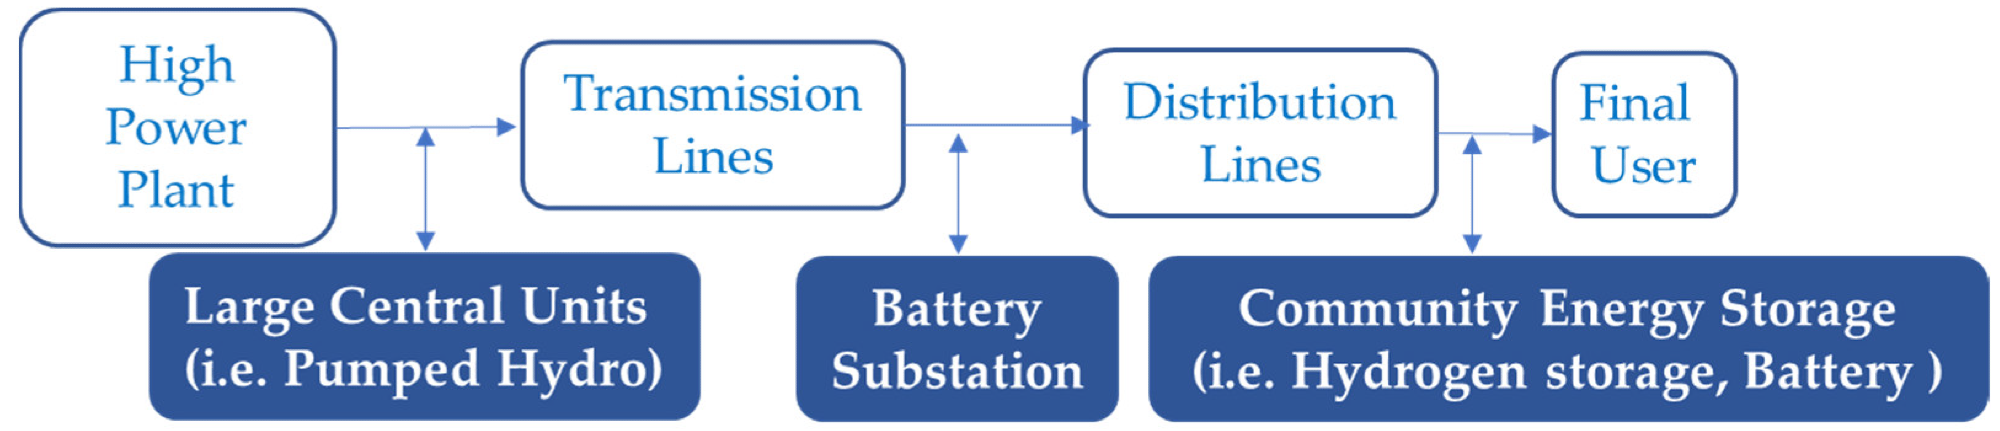 Conventional path of utility energy storage